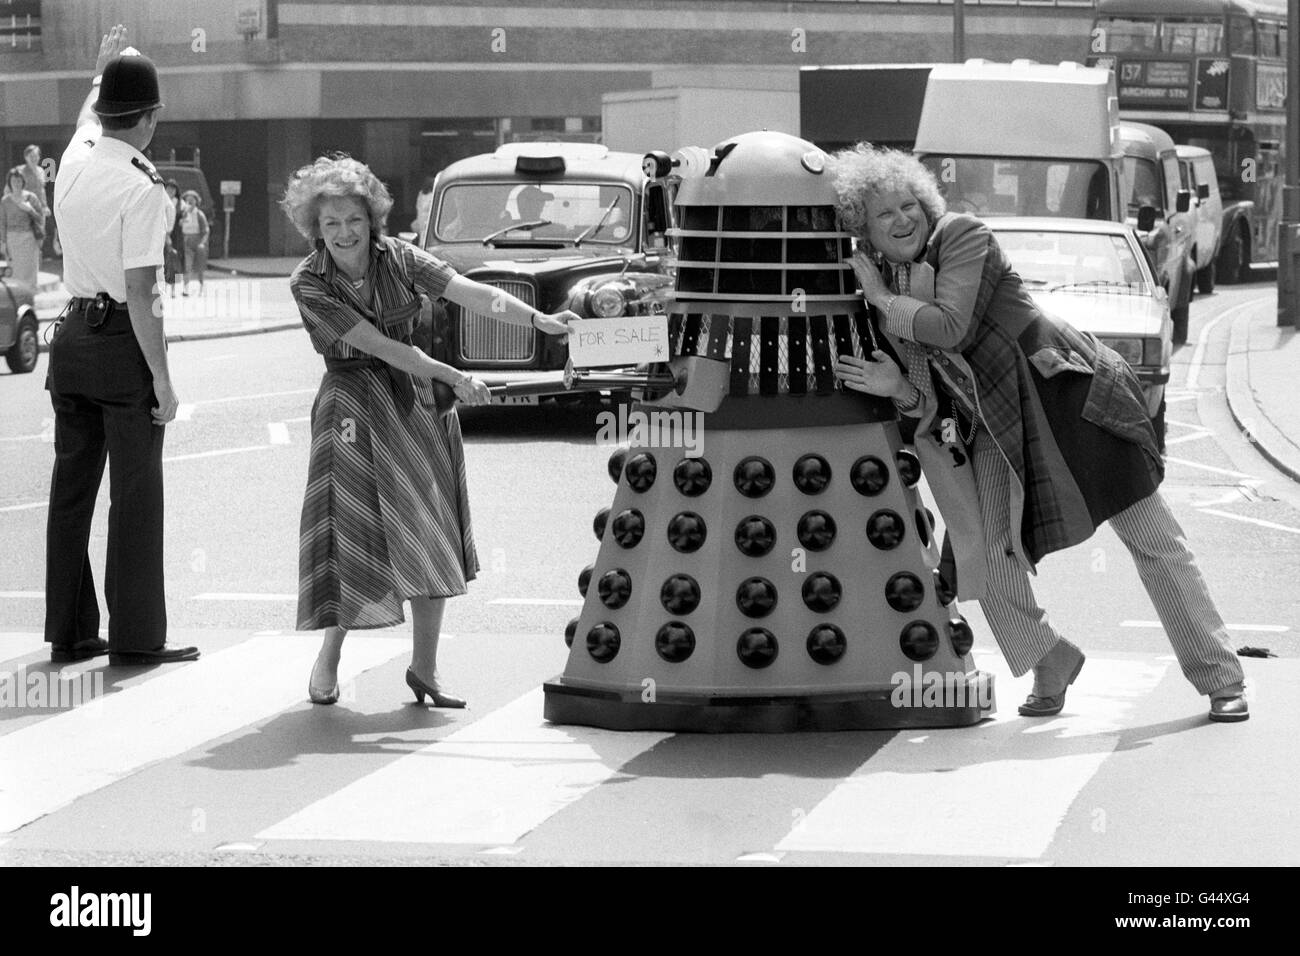 Dr Who actor Colin Baker pushing a Dalek in the direction of Women's Hour presenter Sue McGregor in London. The Dalek is to be auctioned at Christie's in aid of Radio Sudan Appeal organised by BBC Radio Woman's Hour and the British Red Cross. Stock Photo